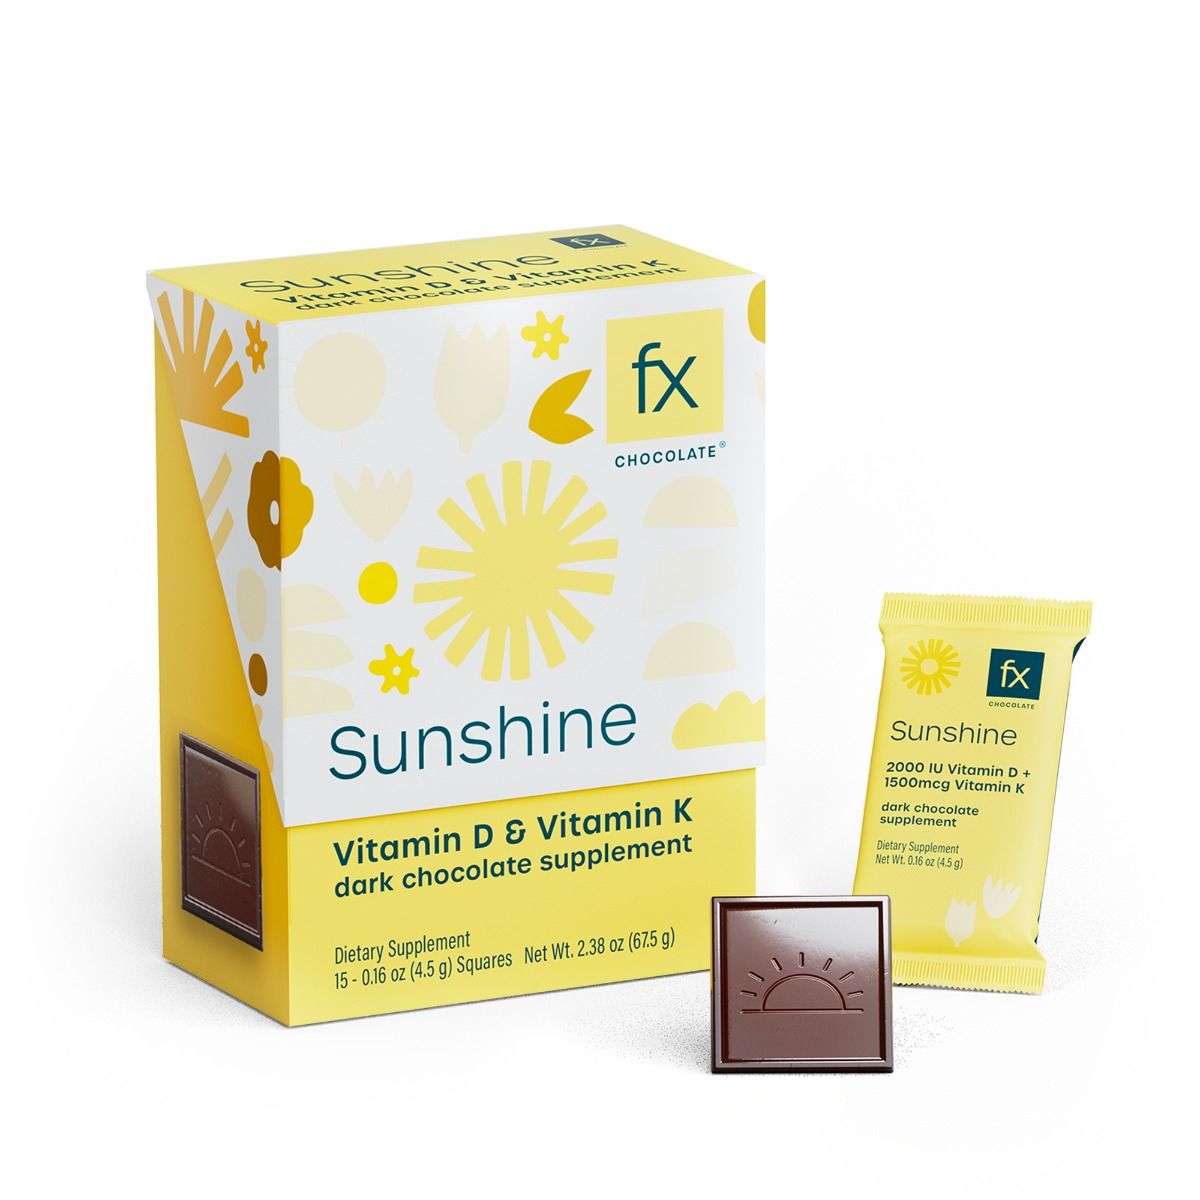 Fx Chocolate® Sunshine (Please contact us or create a Fullscript account at https://us.fullscript.com/welcome/kdiep-kwei to order)